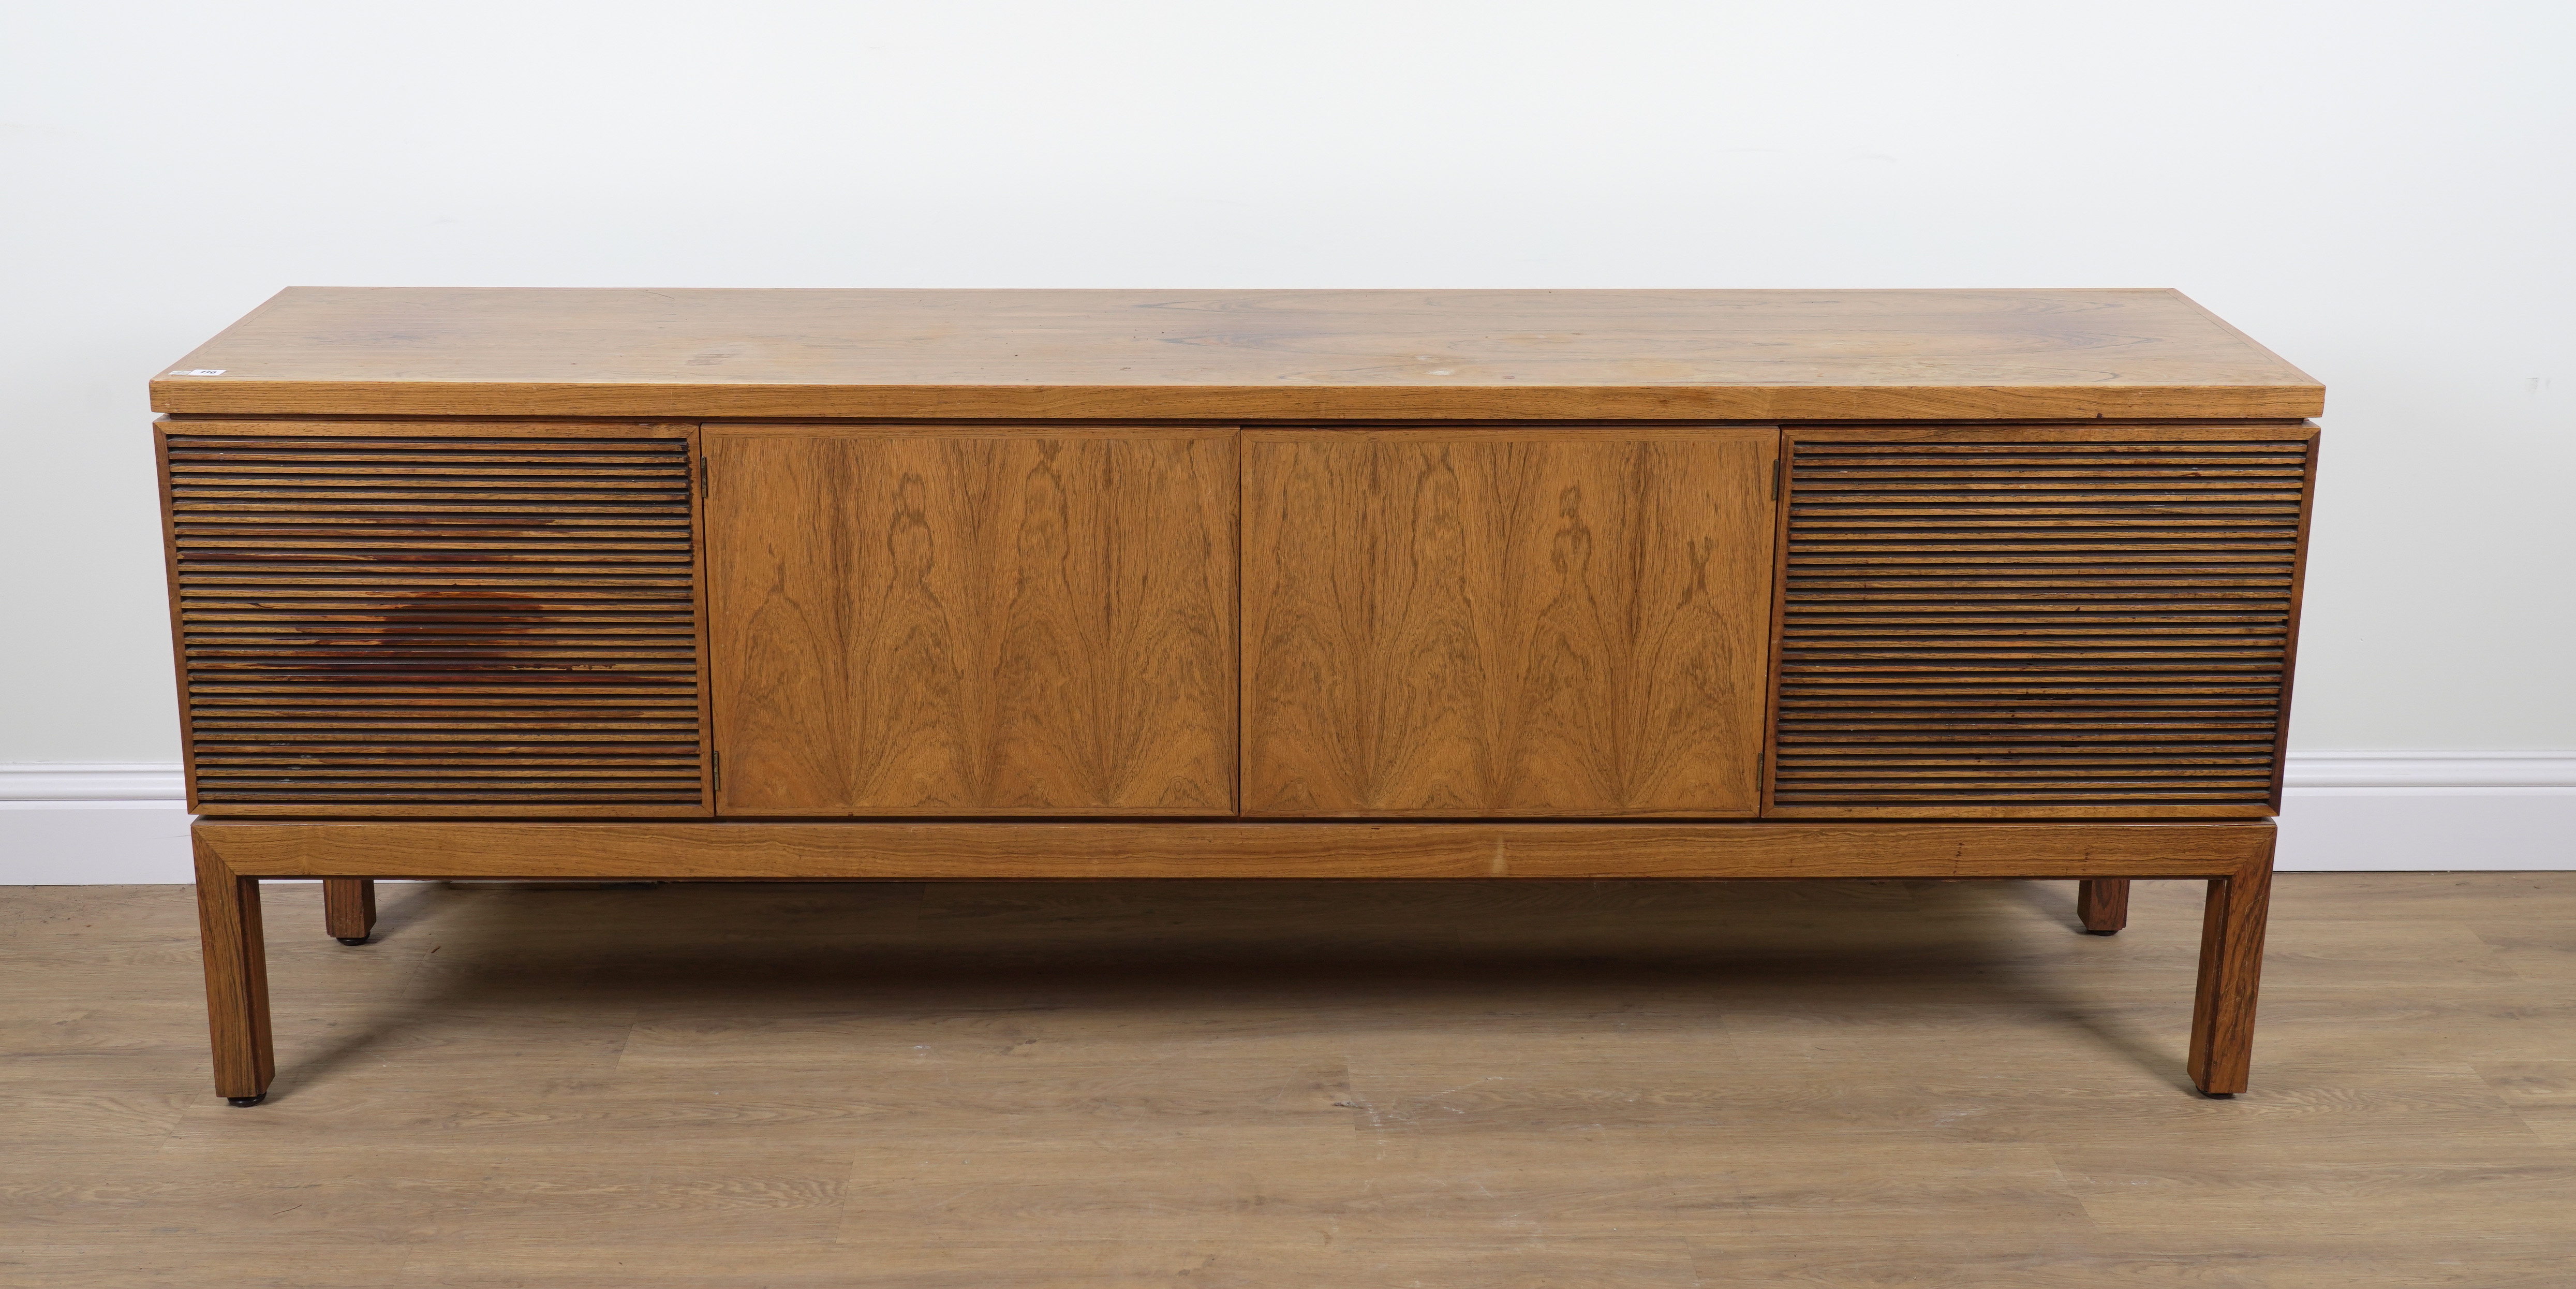 PROBABLY ARCHIE SHINE FOR HEALS FURNITURE; A MID 20TH CENTURY ROSEWOOD FOUR DOOR SIDEBOARD - Image 5 of 6